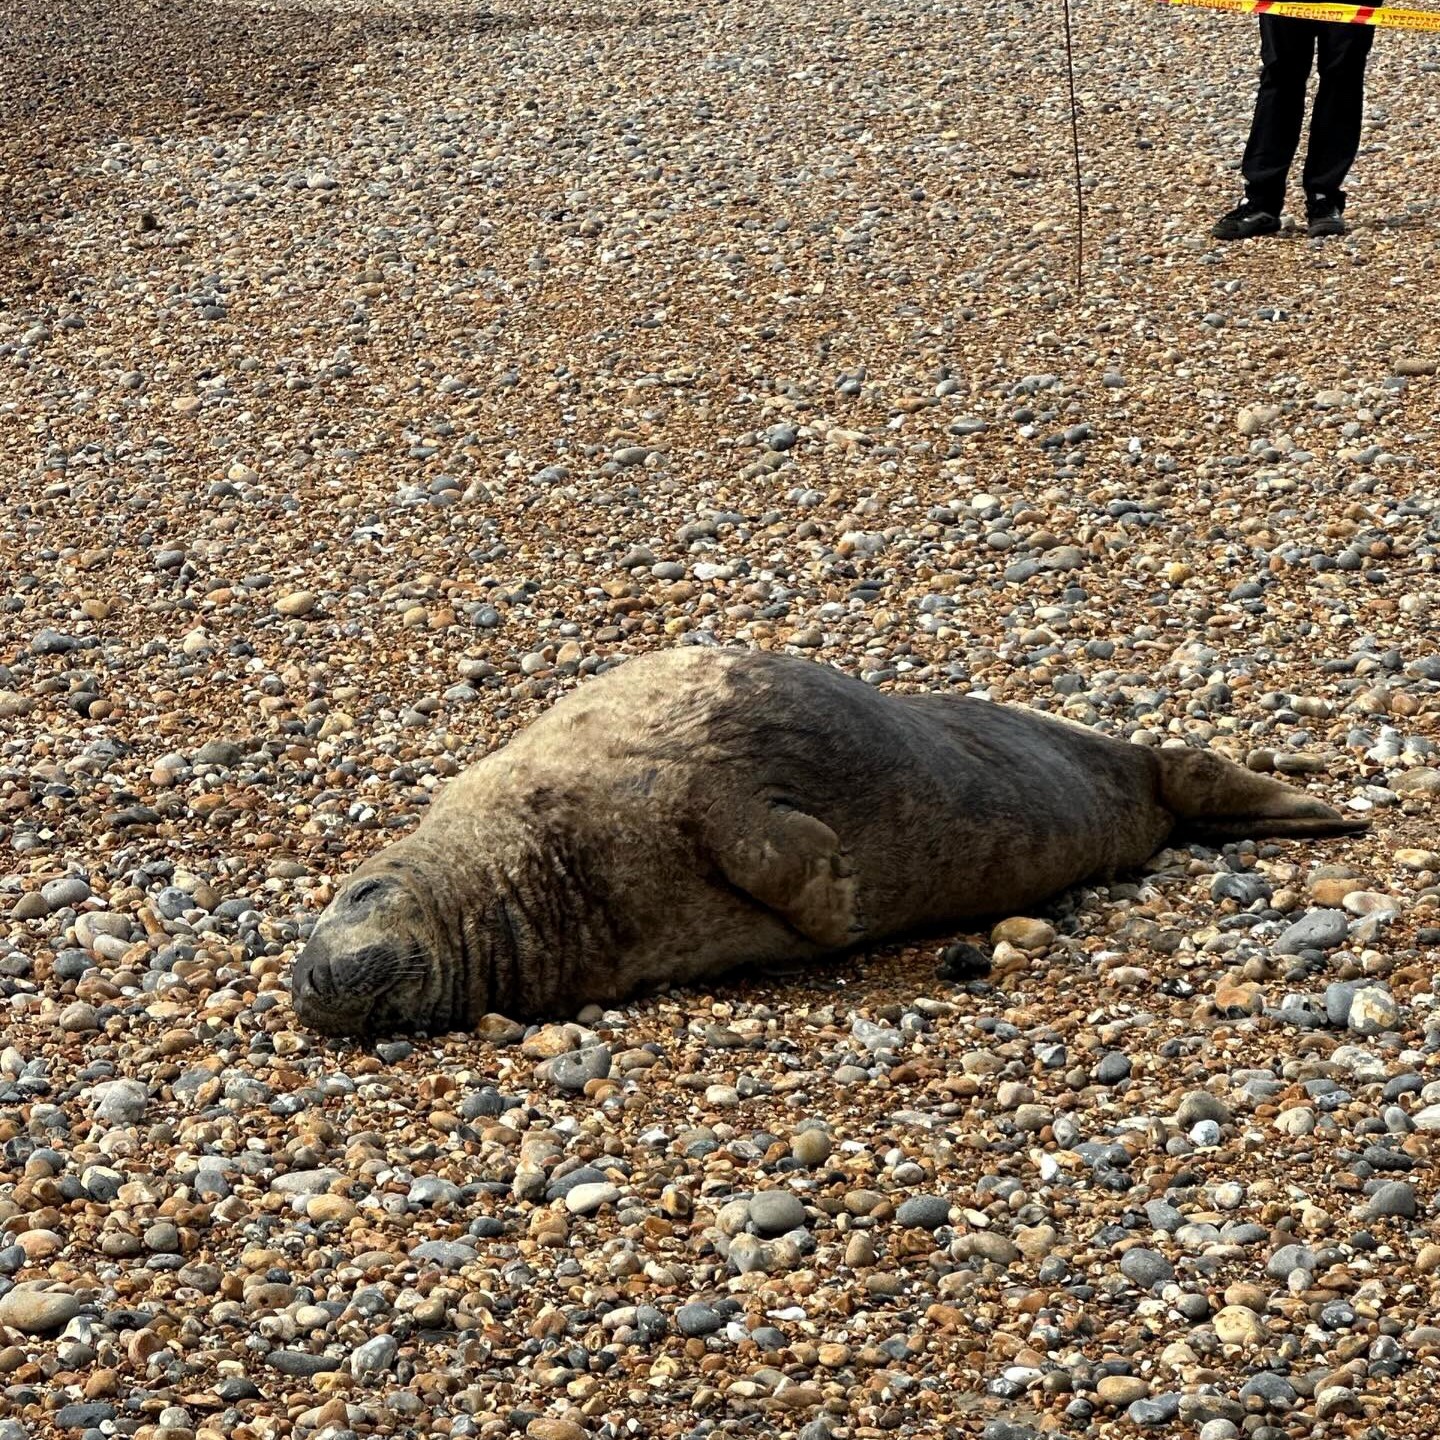 A sunbathing seal spotted by a dog walker on Brighton beach, lounging on the pebbles by the water. Marine rescue urges locals not to interact.